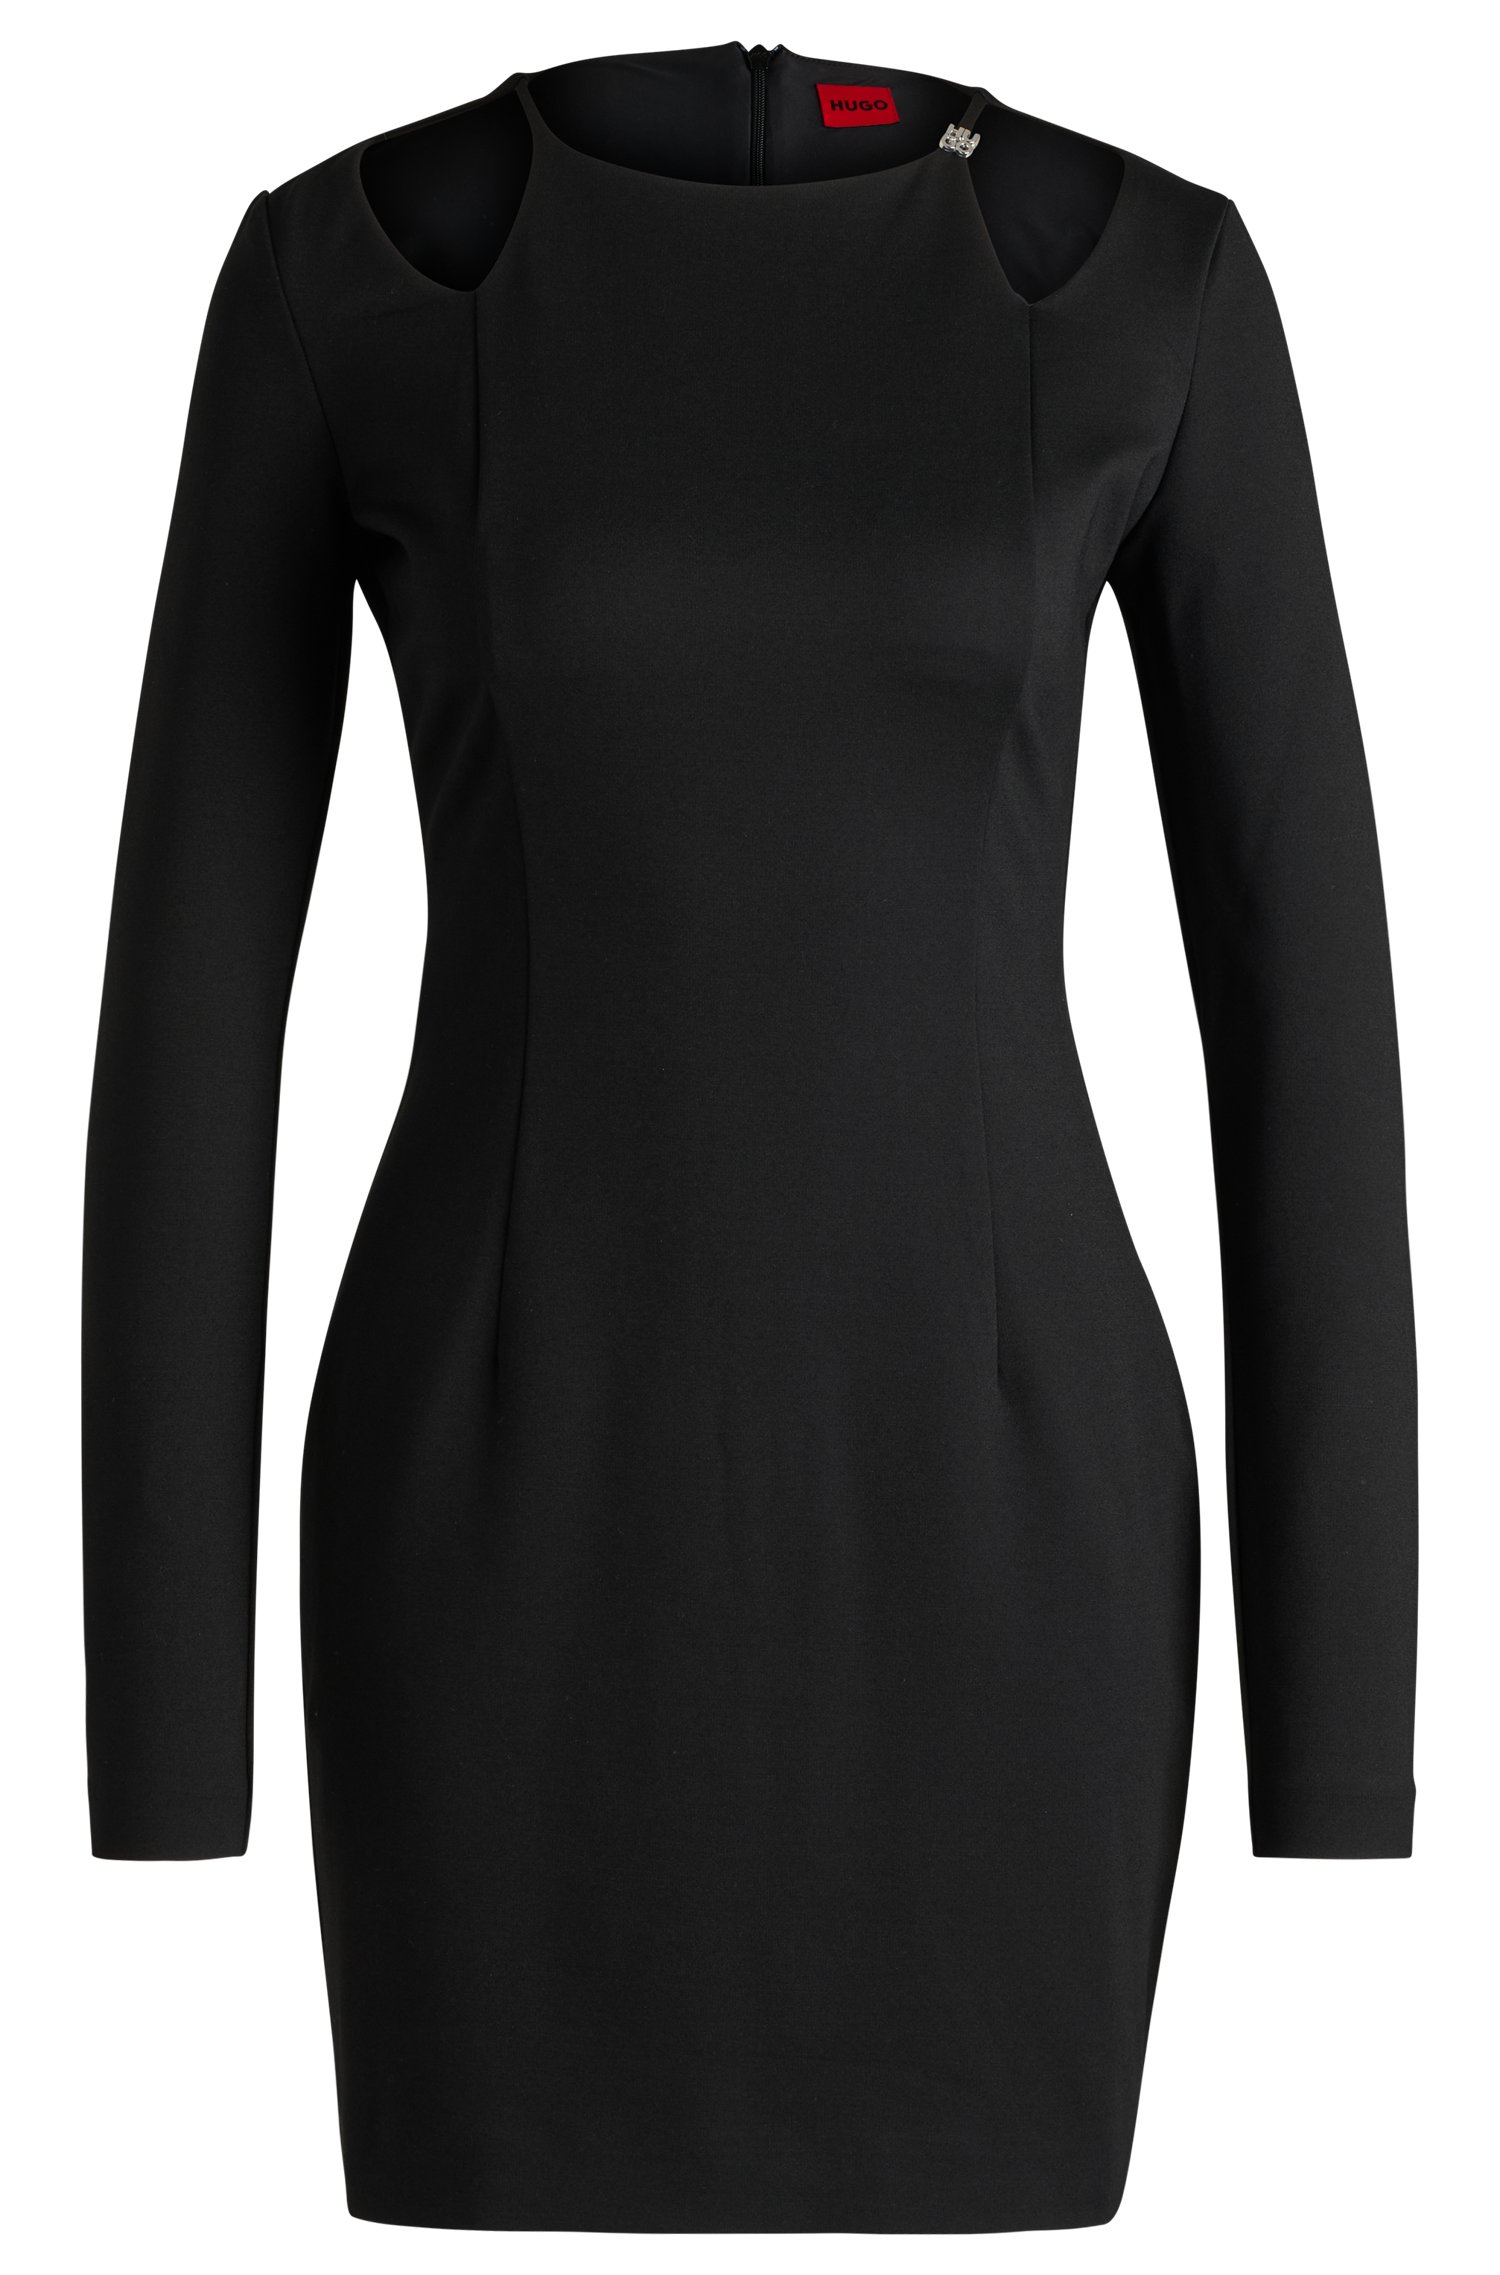 Bodycon mini dress with cut-out details